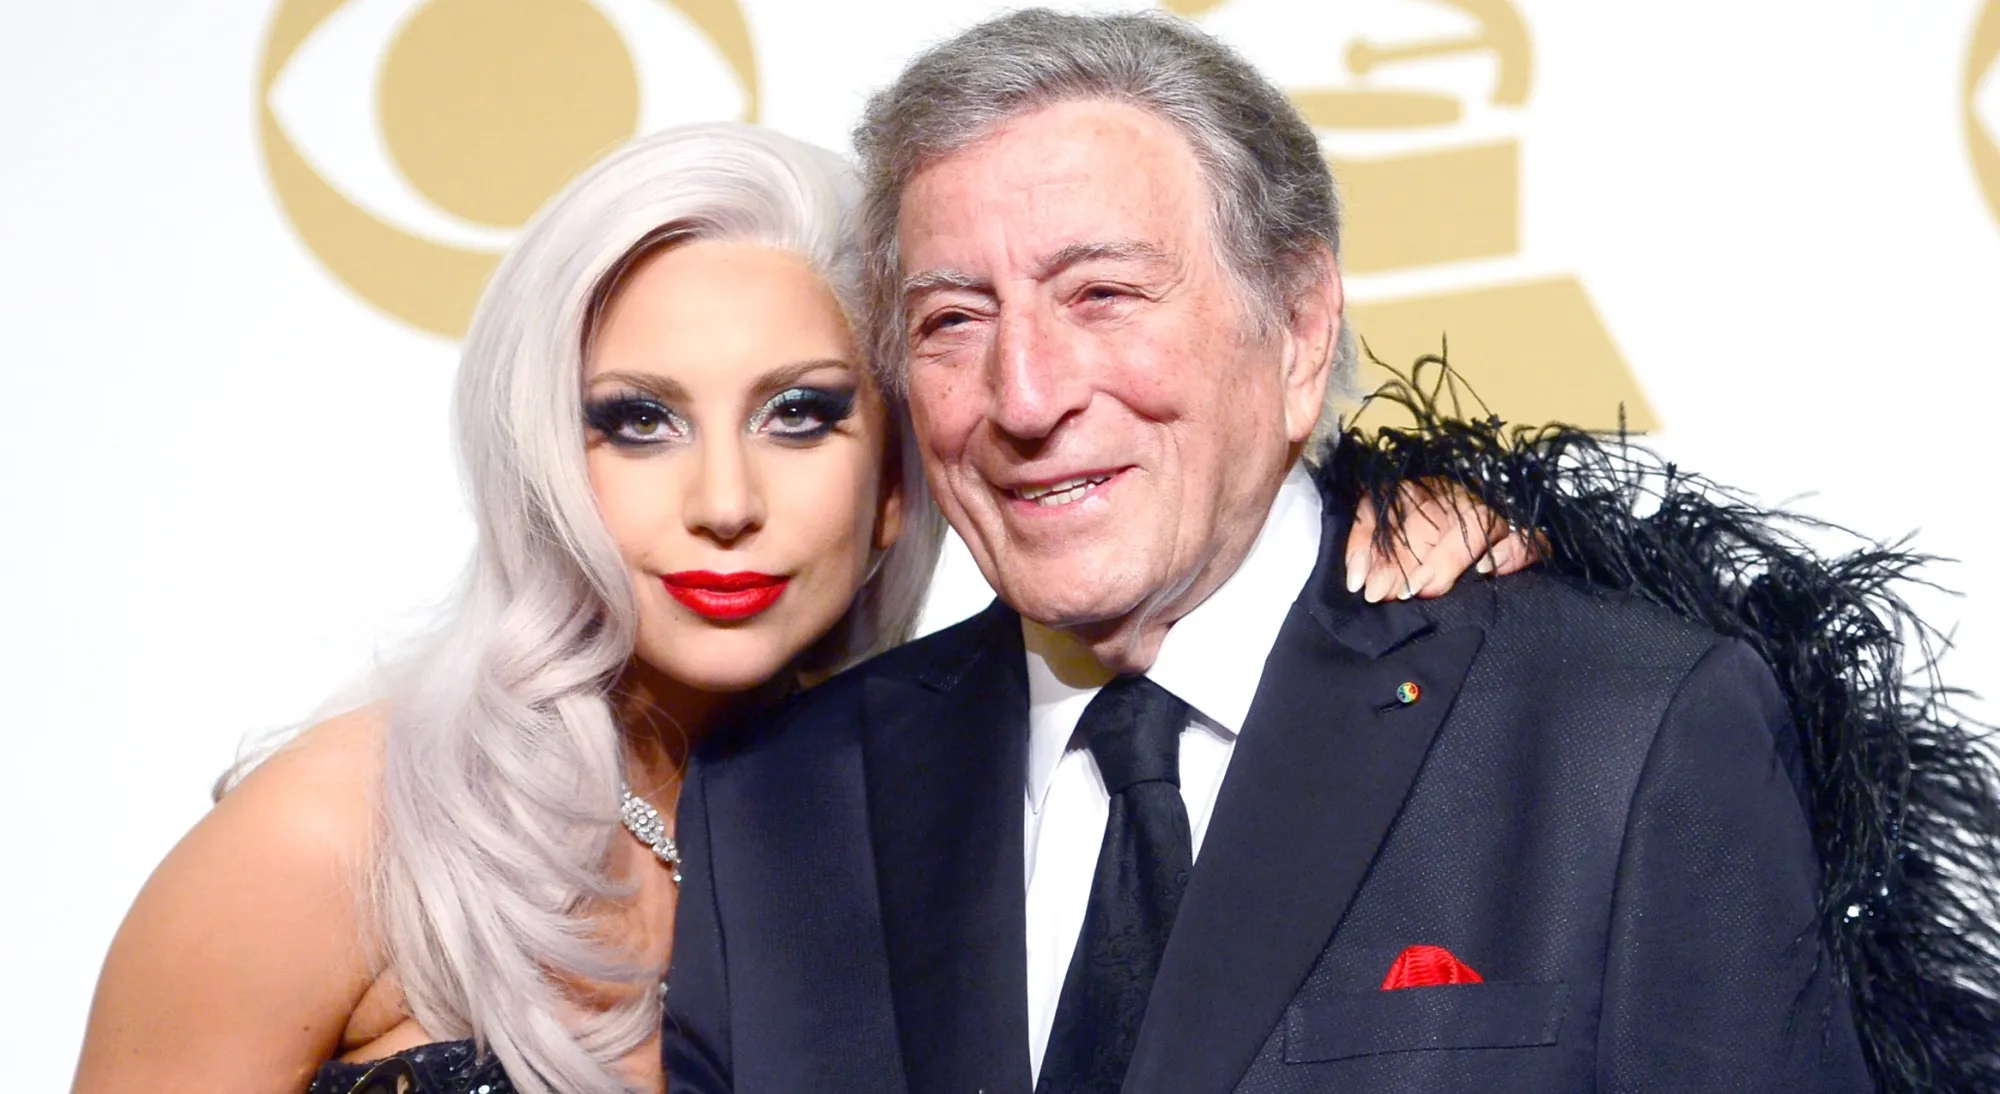 Lady Gaga says goodbye to Tony Bennett with an emotional message on Instagram